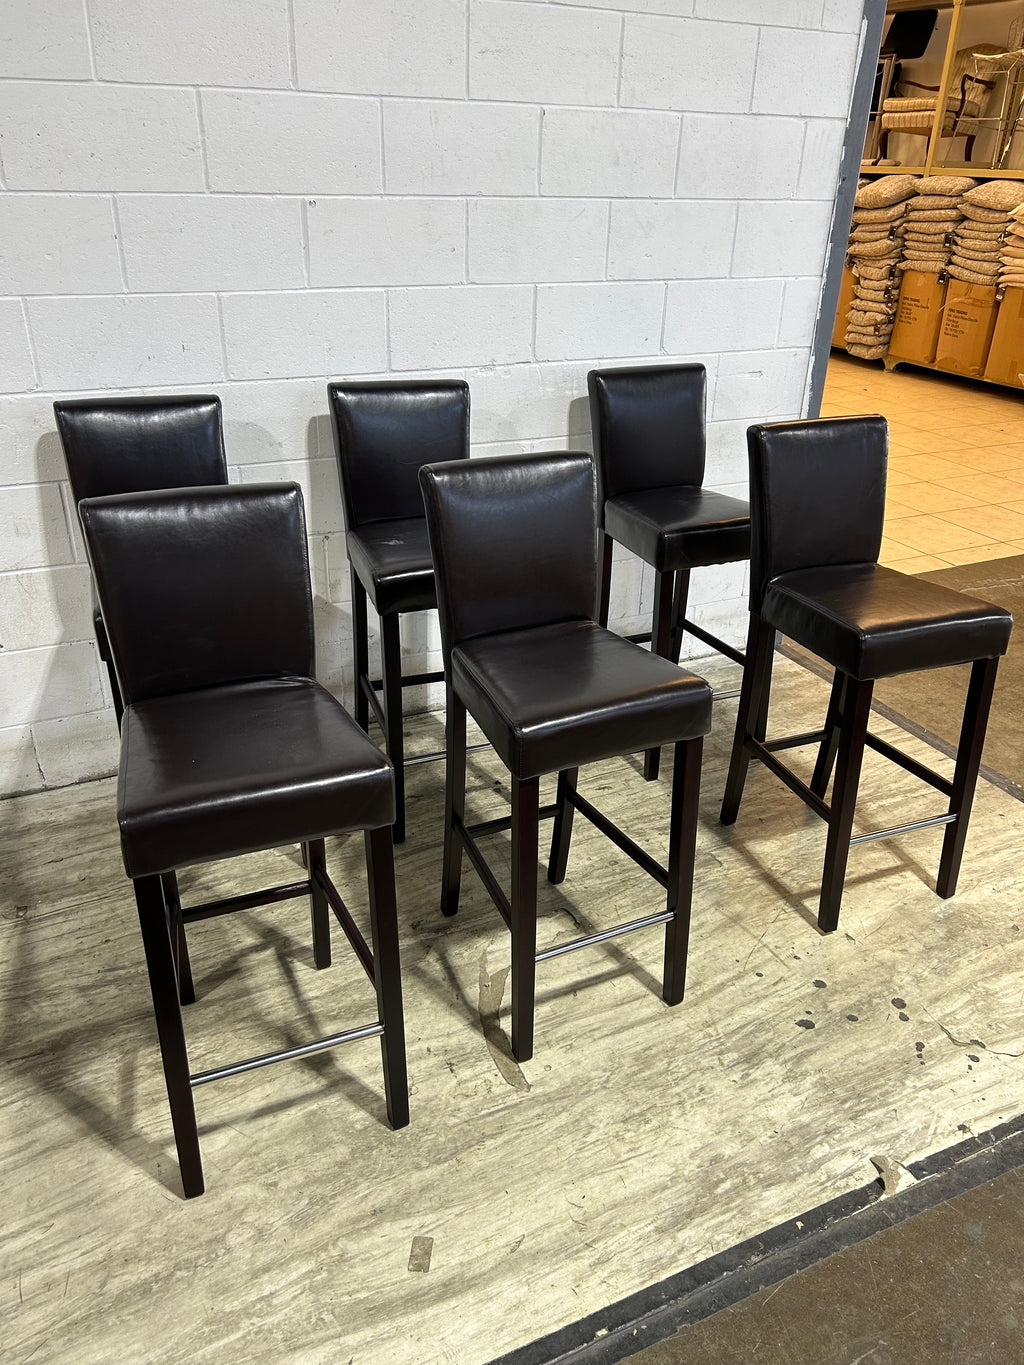 16"W chairs Set of 6 tall chairs